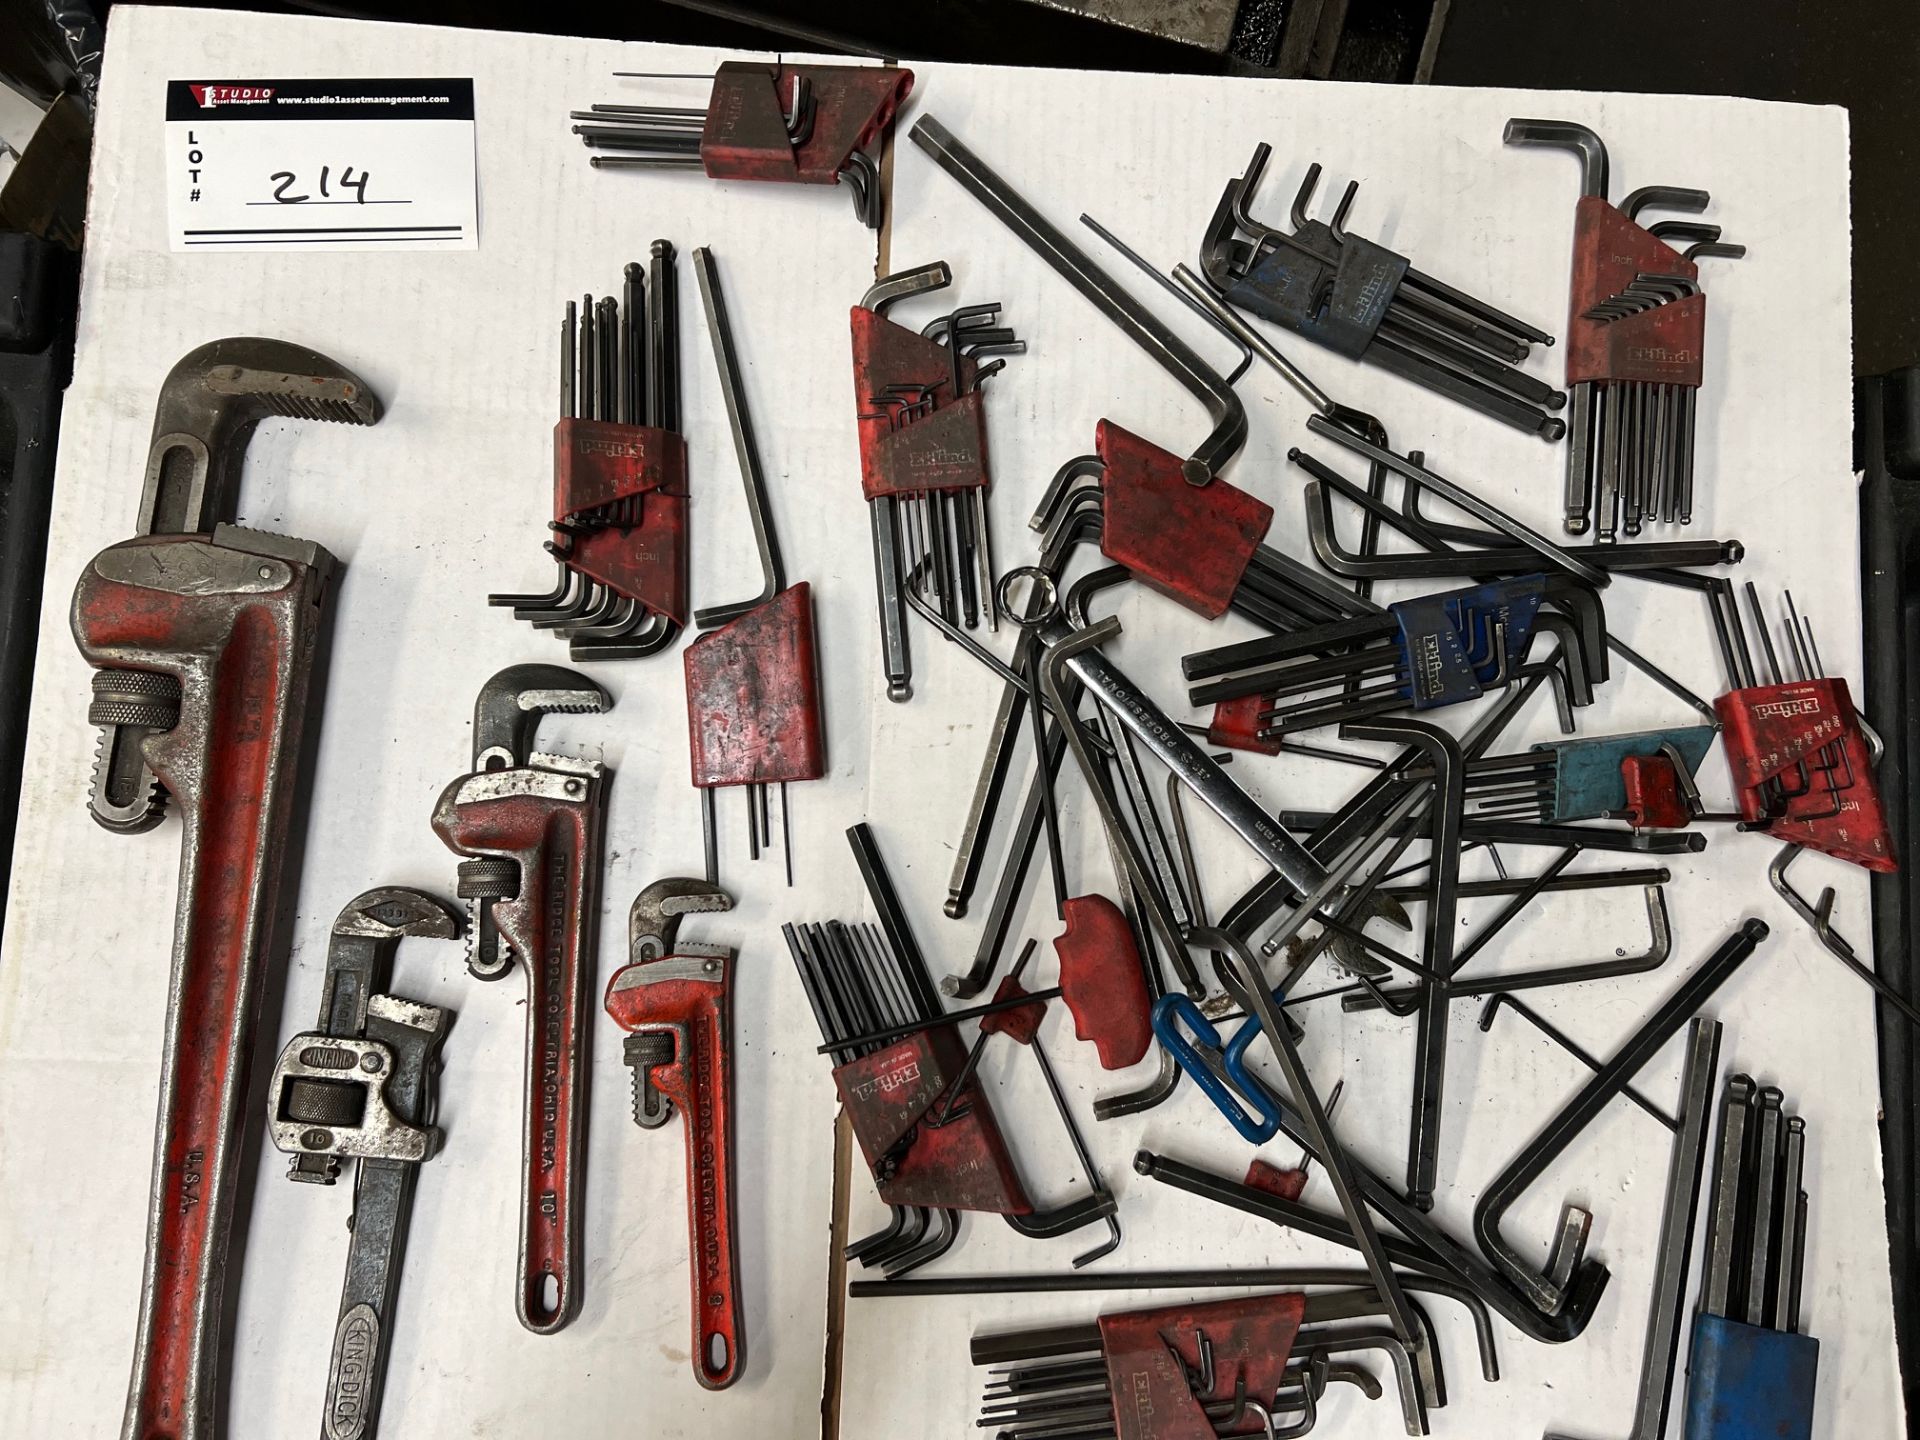 LOT/PIPE WRENCHES AND ALLEN KEYS - Image 3 of 3